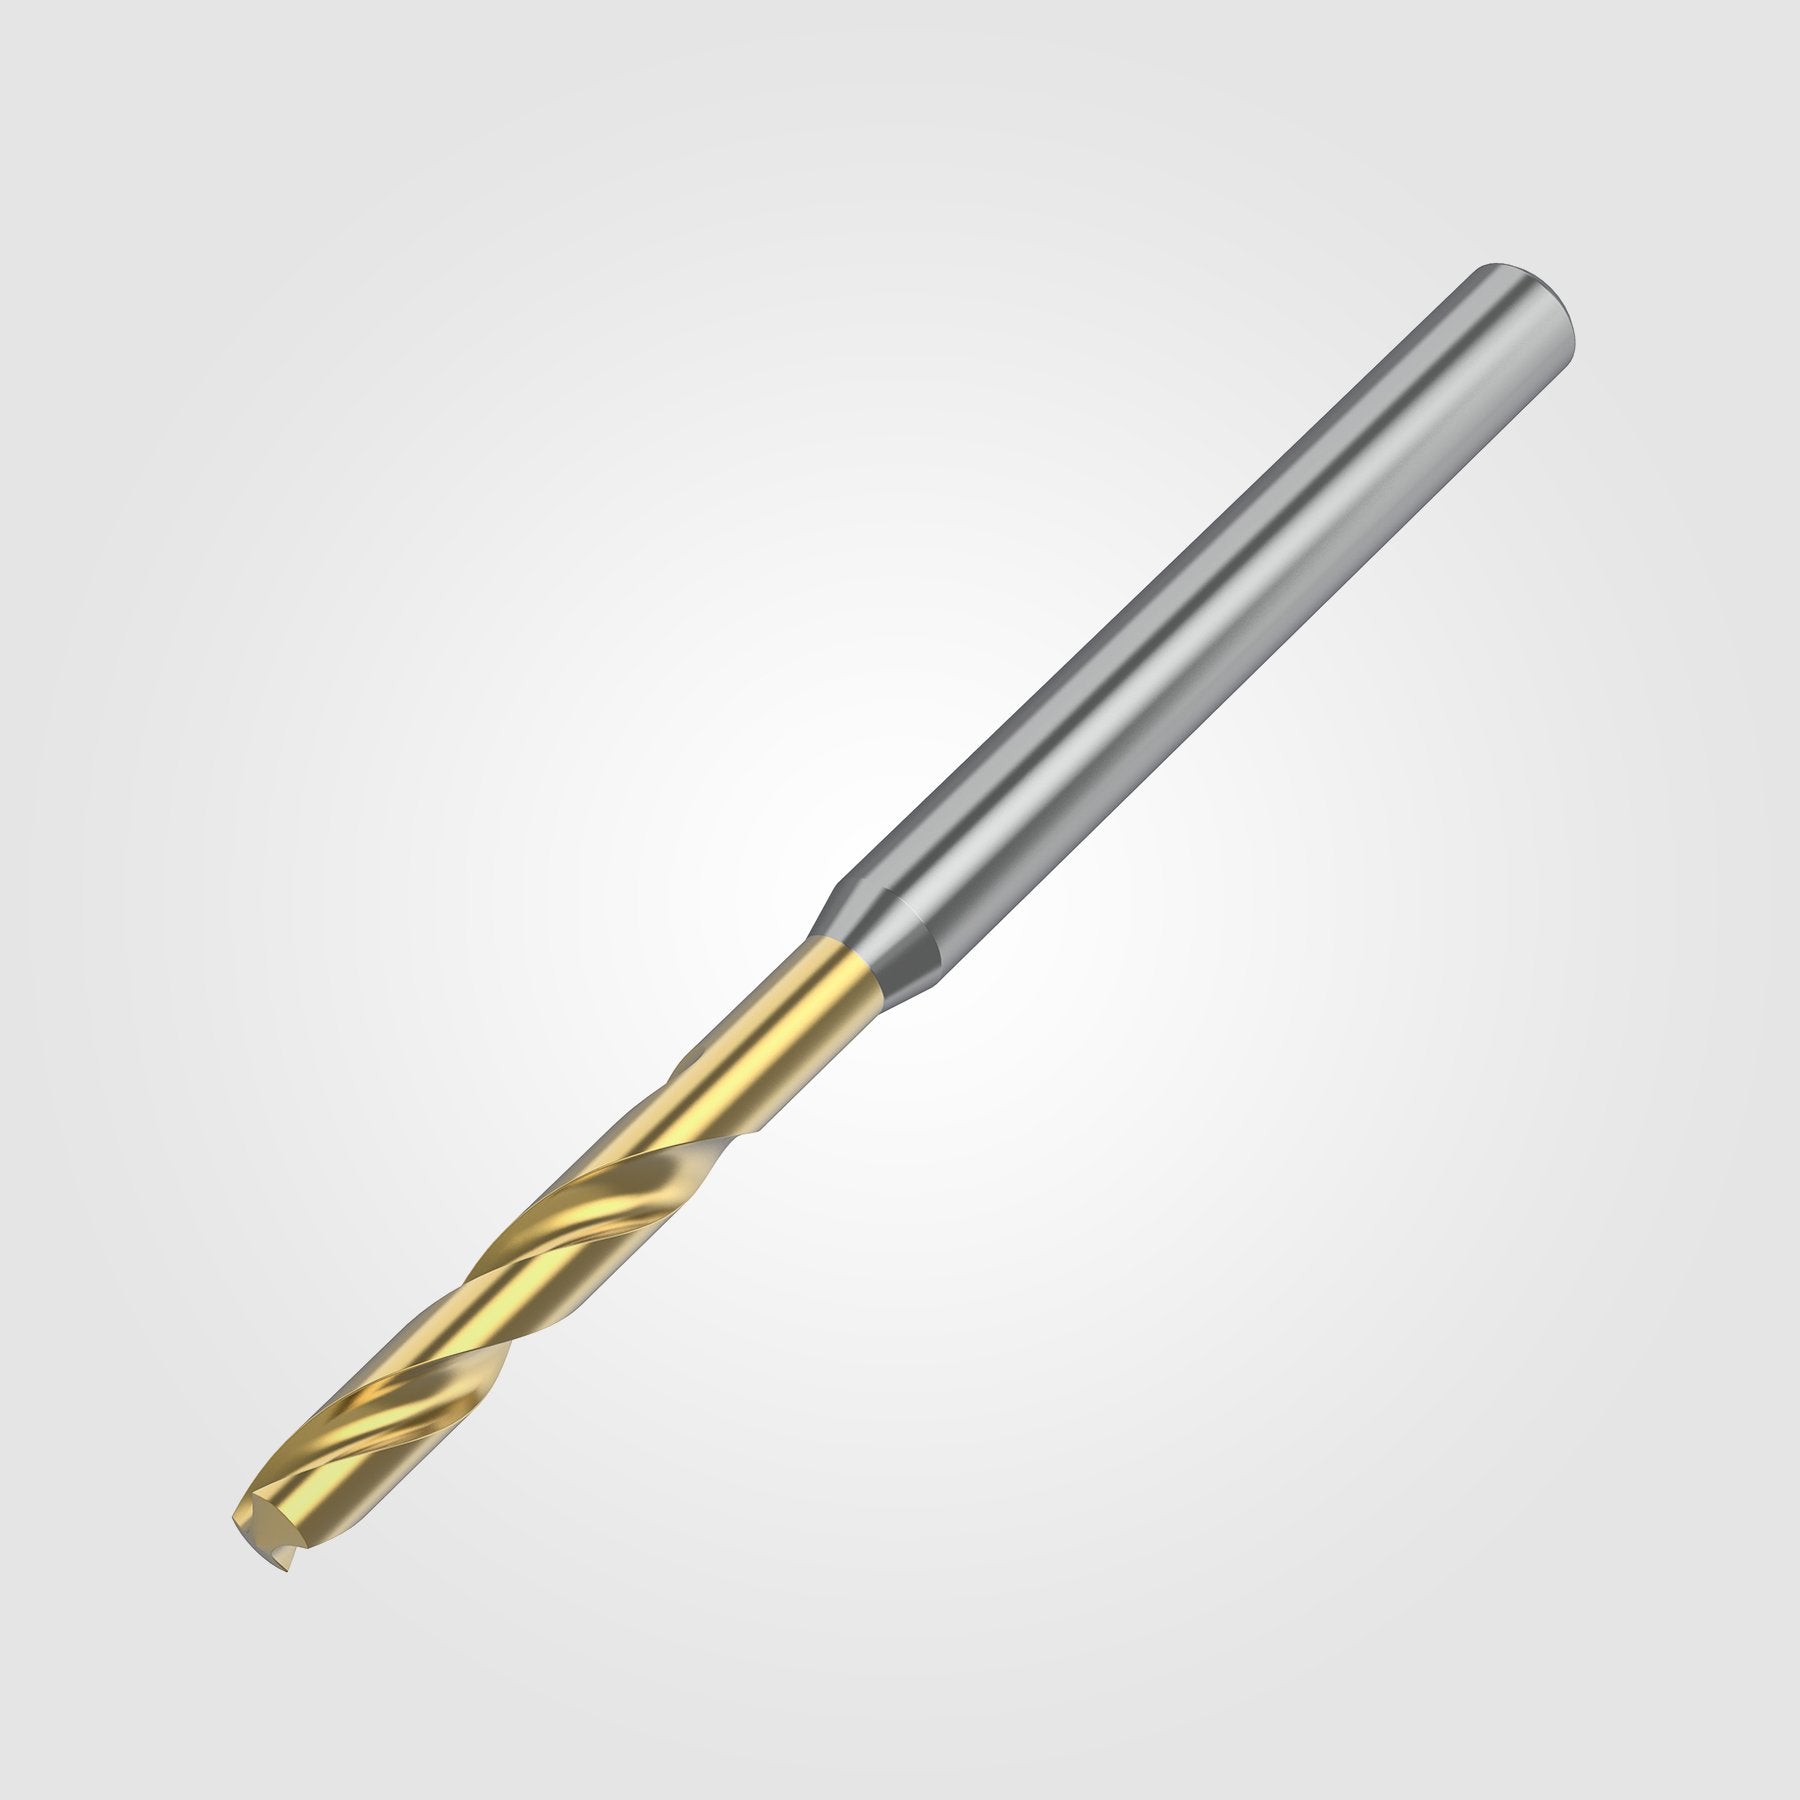 GOdrill (THROUGH COOLANT) | 1.8mm / .0709" / 5xD | SOLID CARBIDE DRILL | 4149146